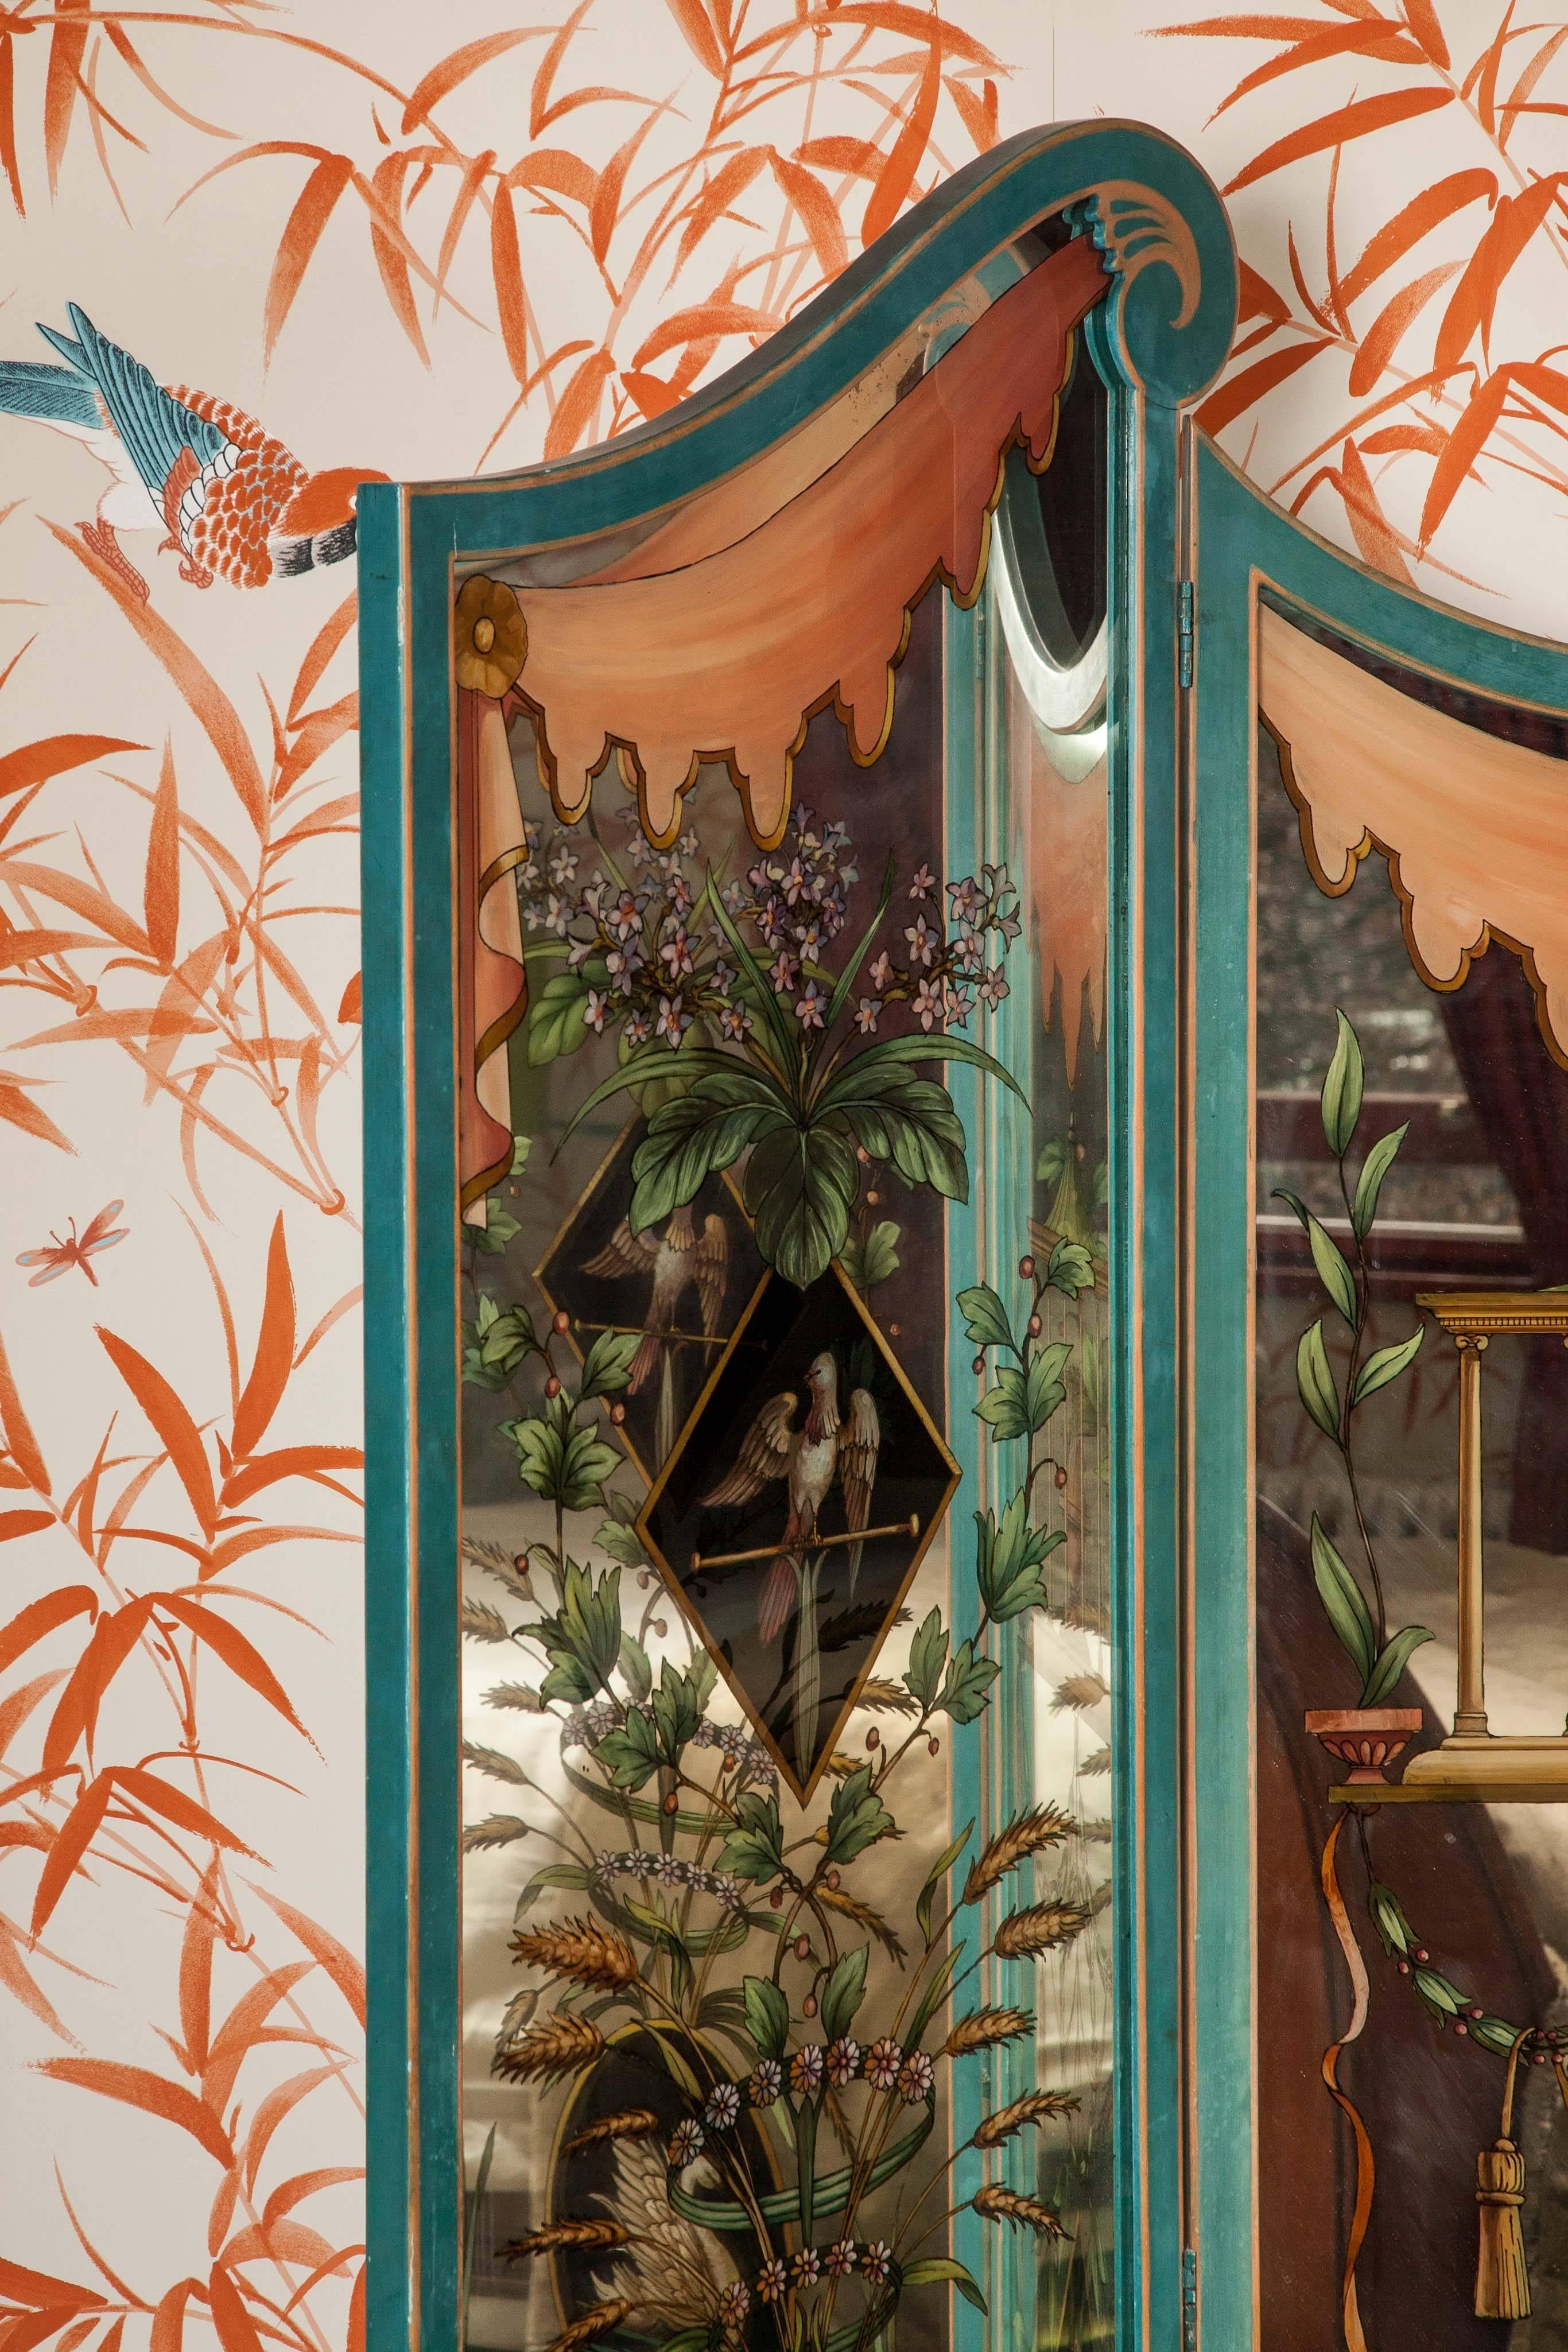 Adorned with beautiful paintings of flora and fauna and featuring swans and other wildlife this gorgeous mirrored screen is the perfect glamorous addition to a bedroom or dressing room. 

